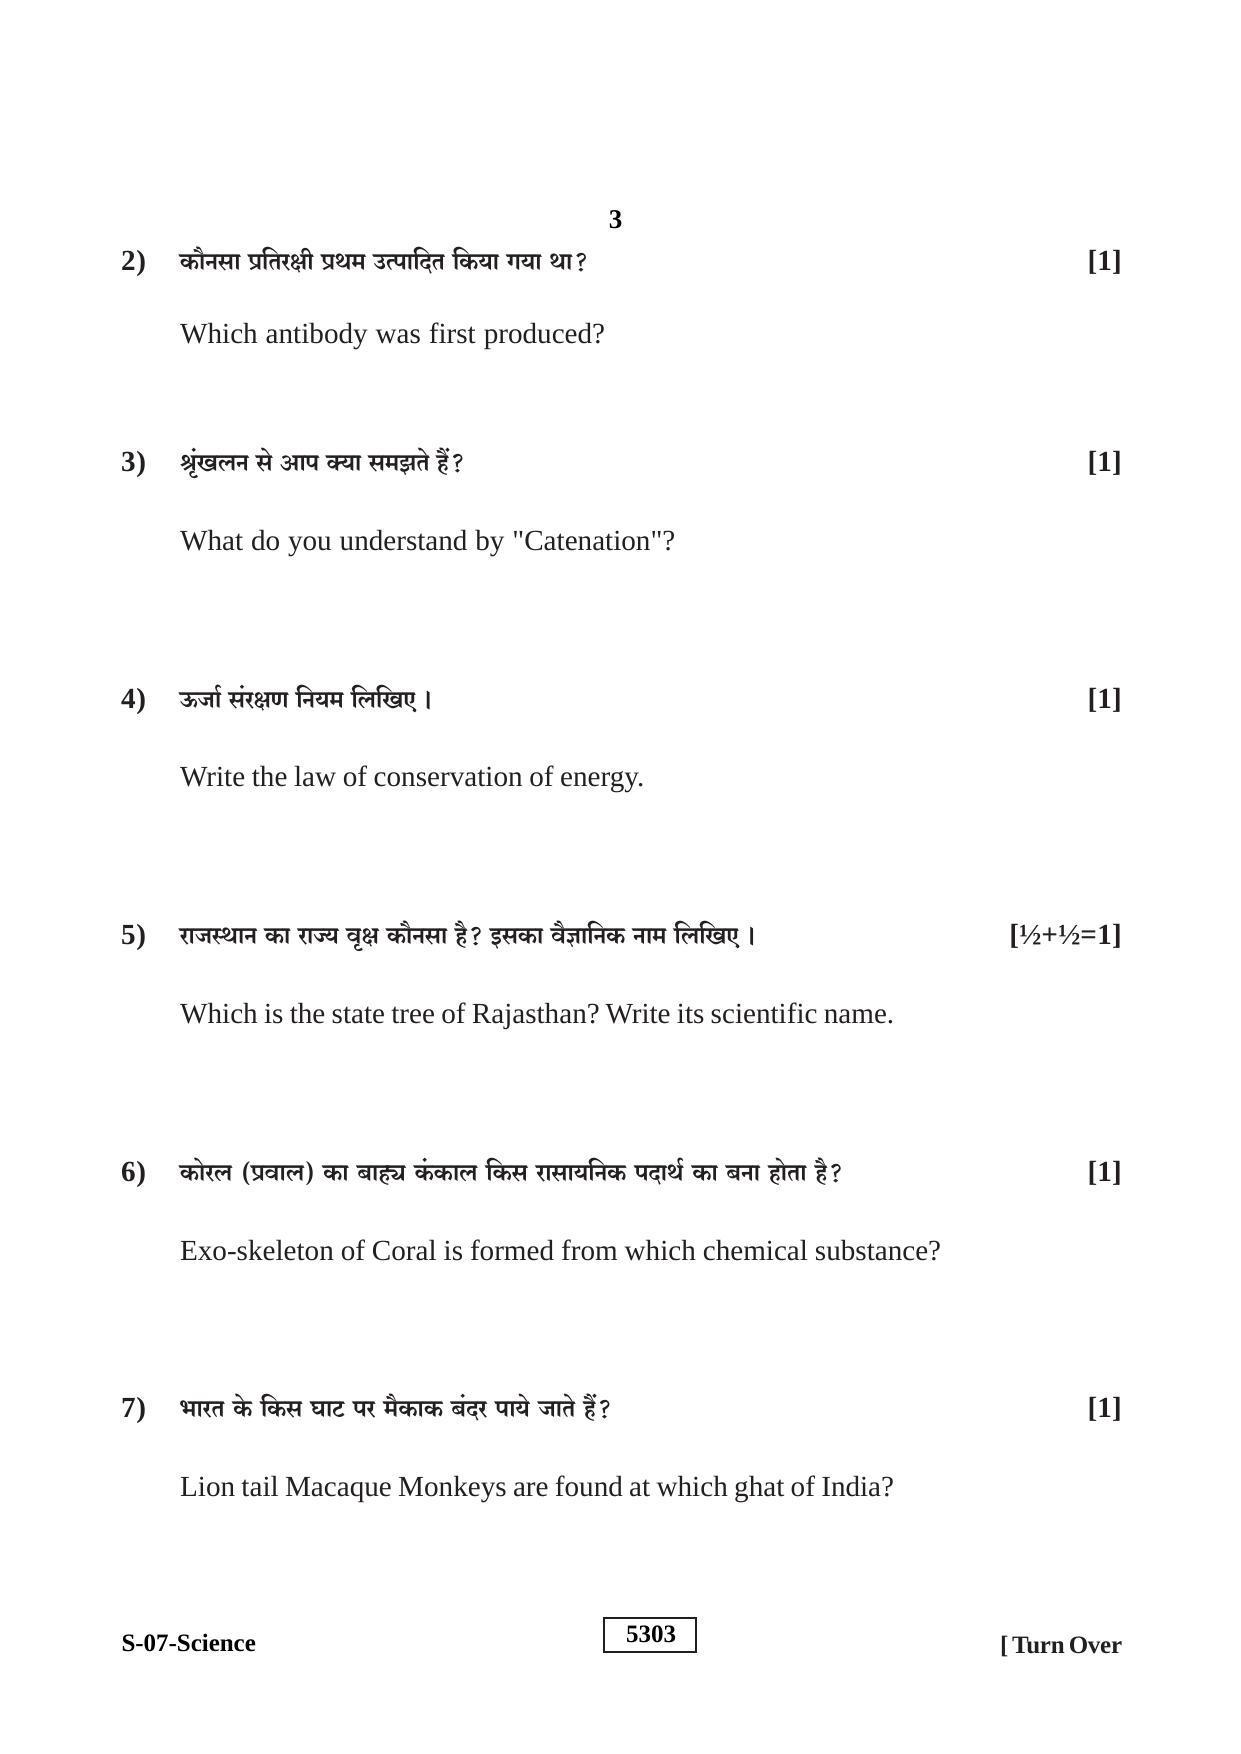 RBSE Class 10 Science 2020 Question Paper - Page 3